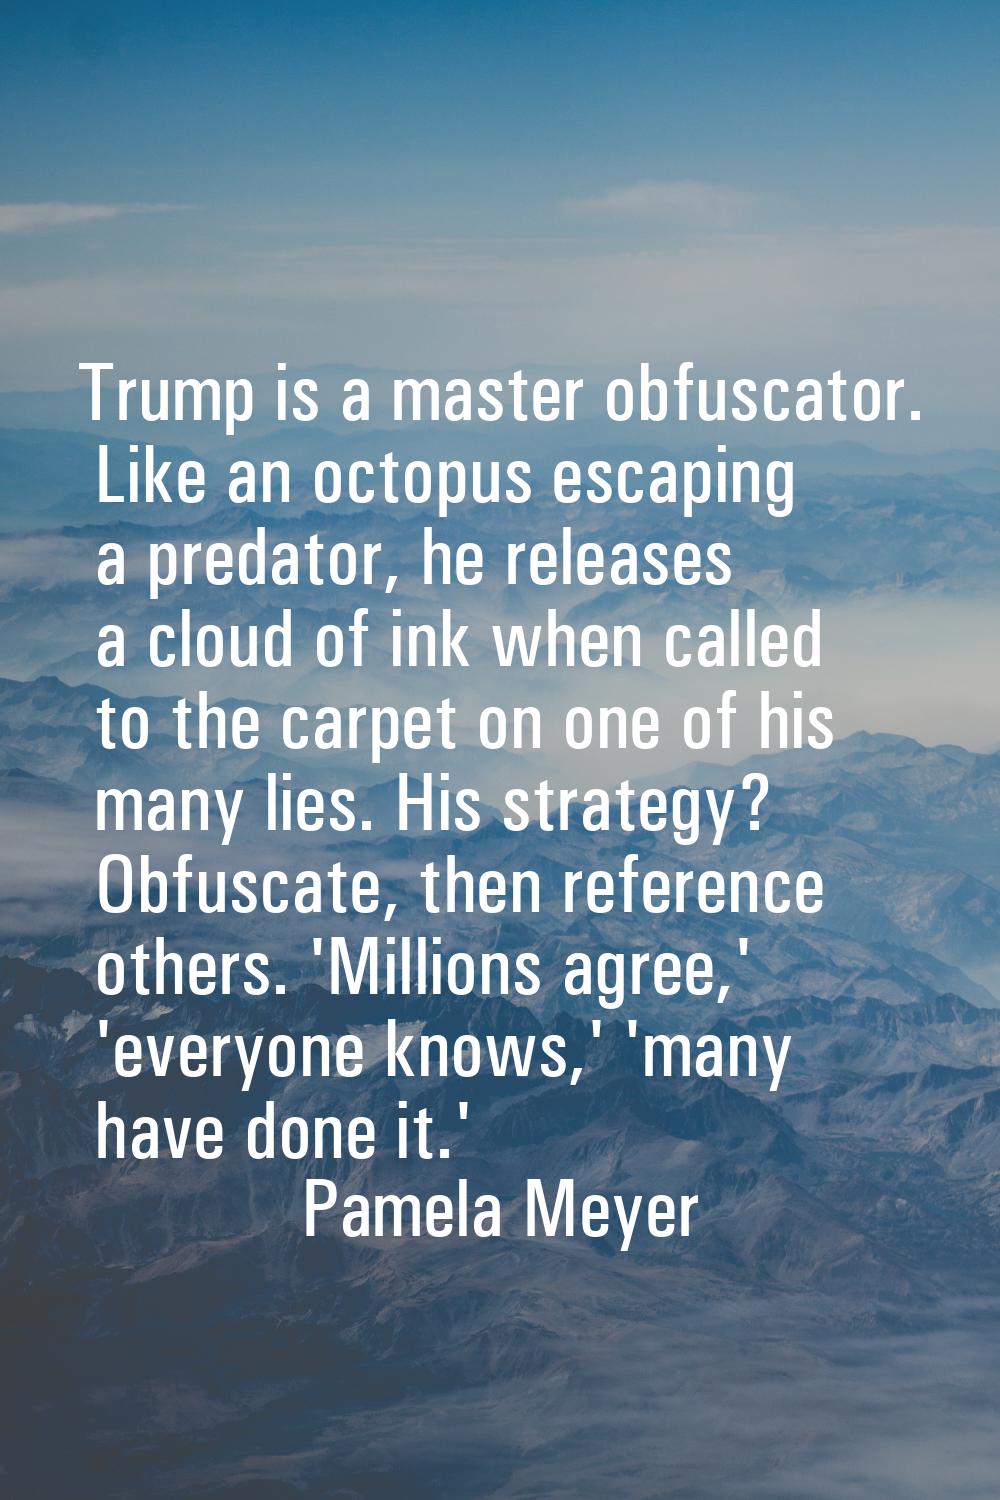 Trump is a master obfuscator. Like an octopus escaping a predator, he releases a cloud of ink when 